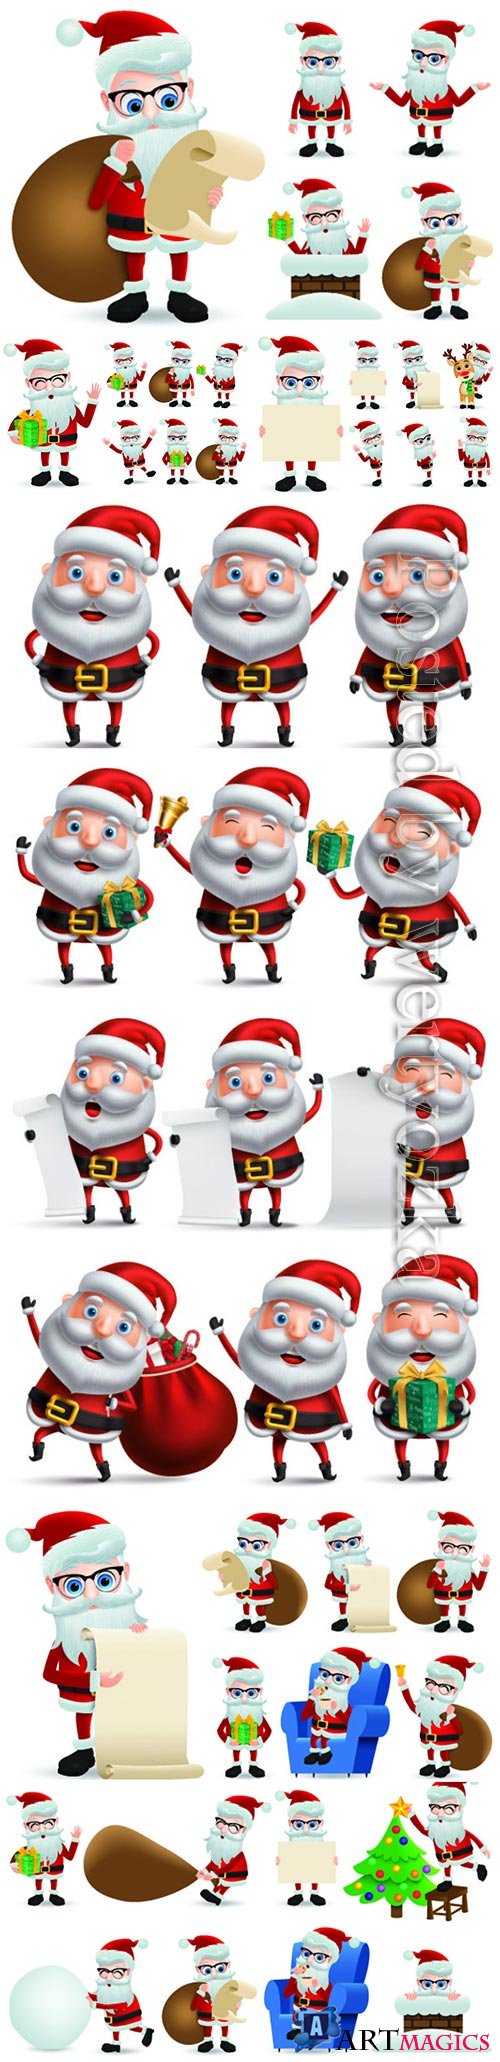 Santa claus vector character showing and holding wish list for christmas gift